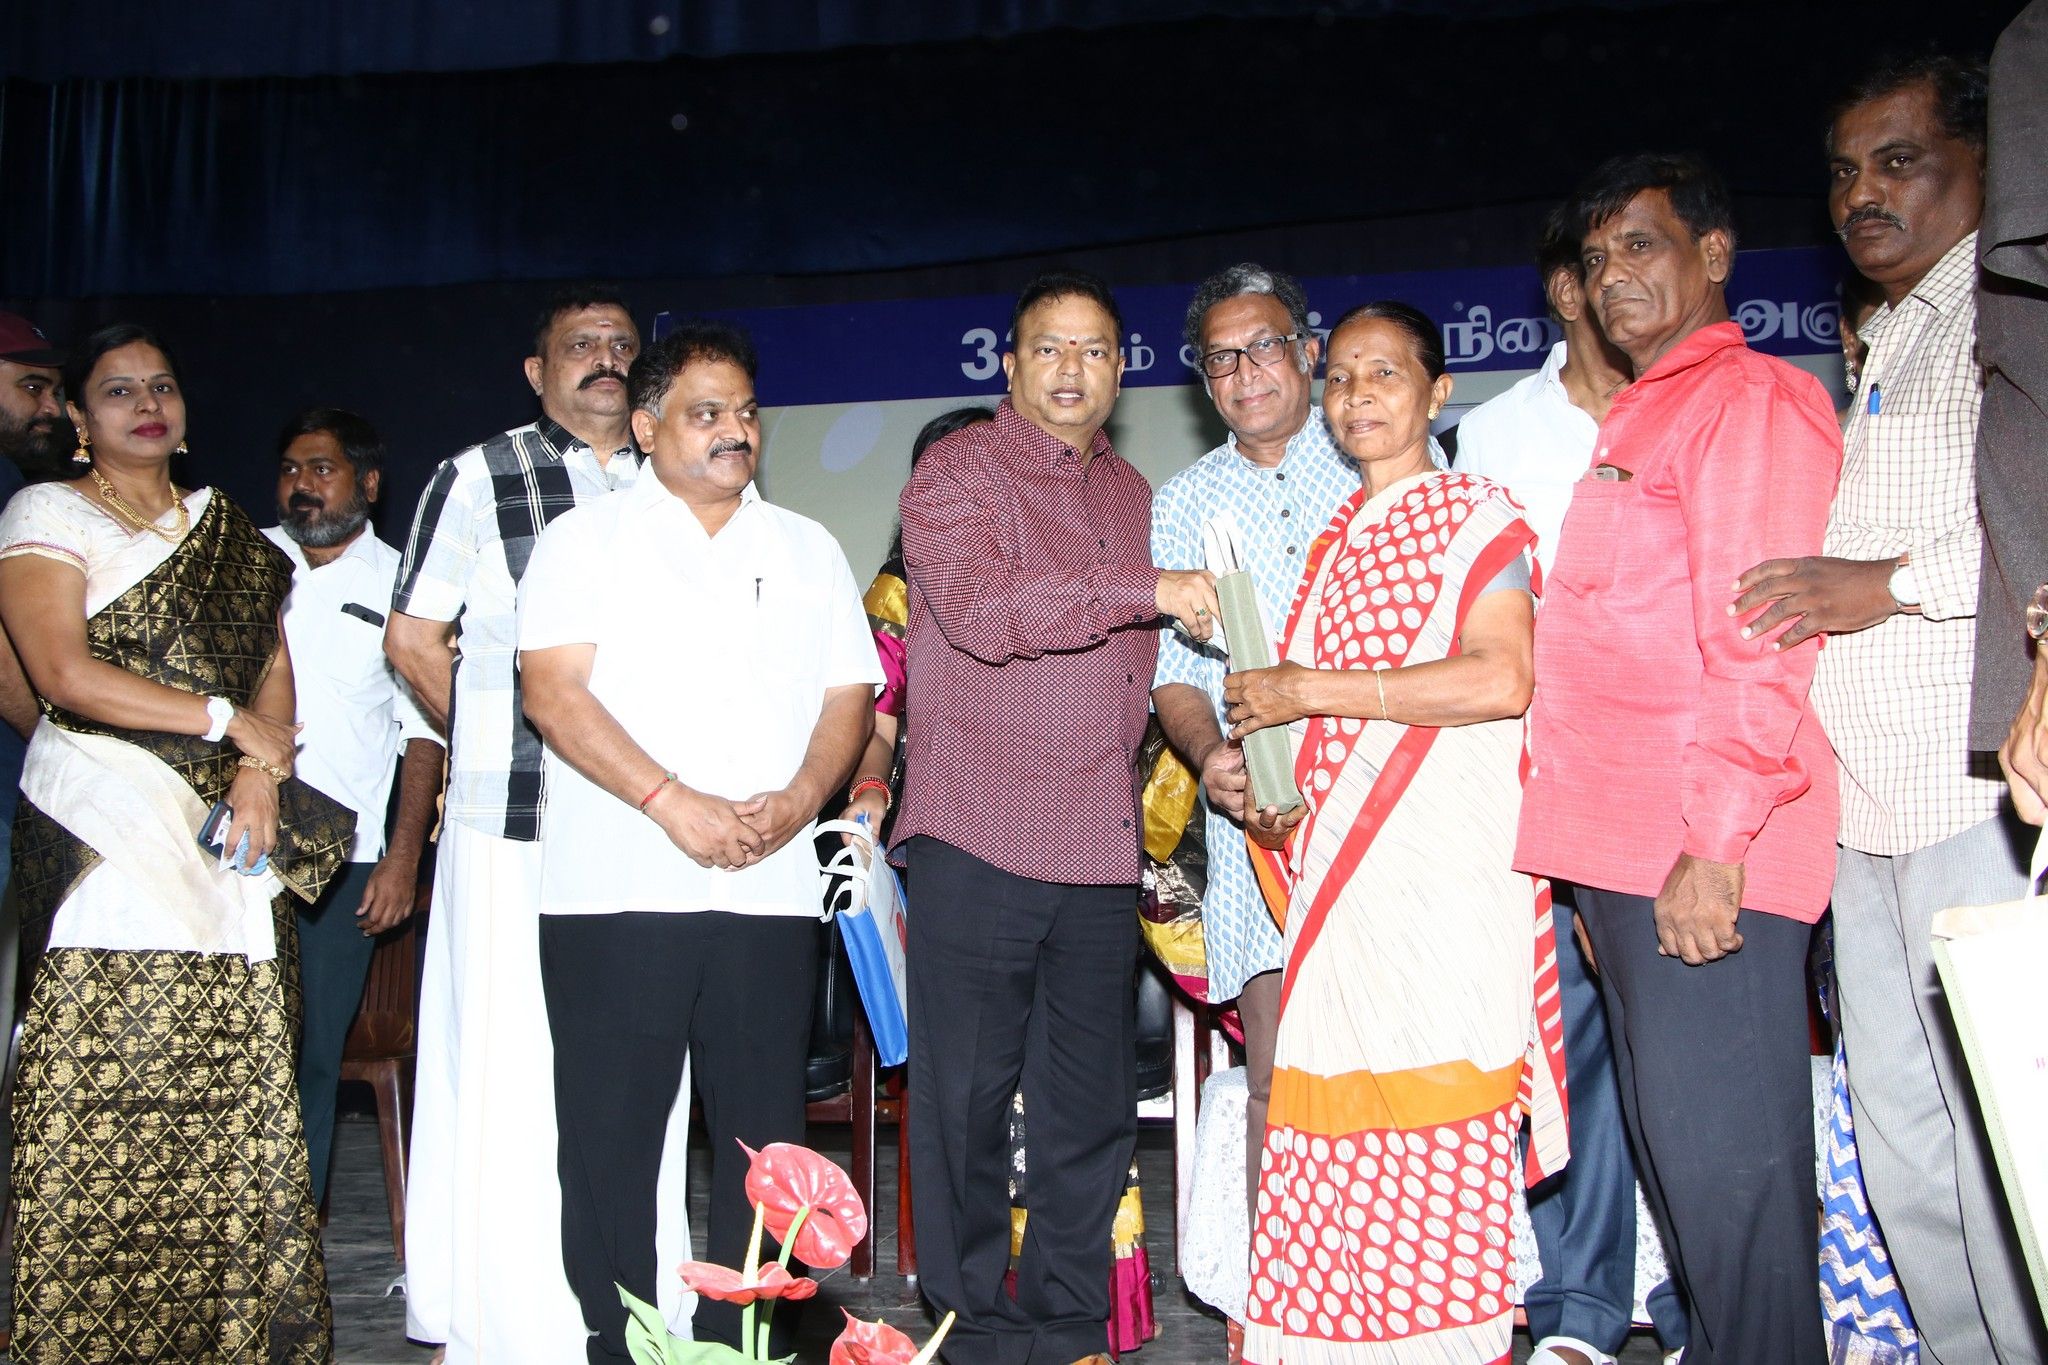 Celebrities At 33rd Anniversary Of Late Dr.Isari Velan Event Stills Tamil Gallery